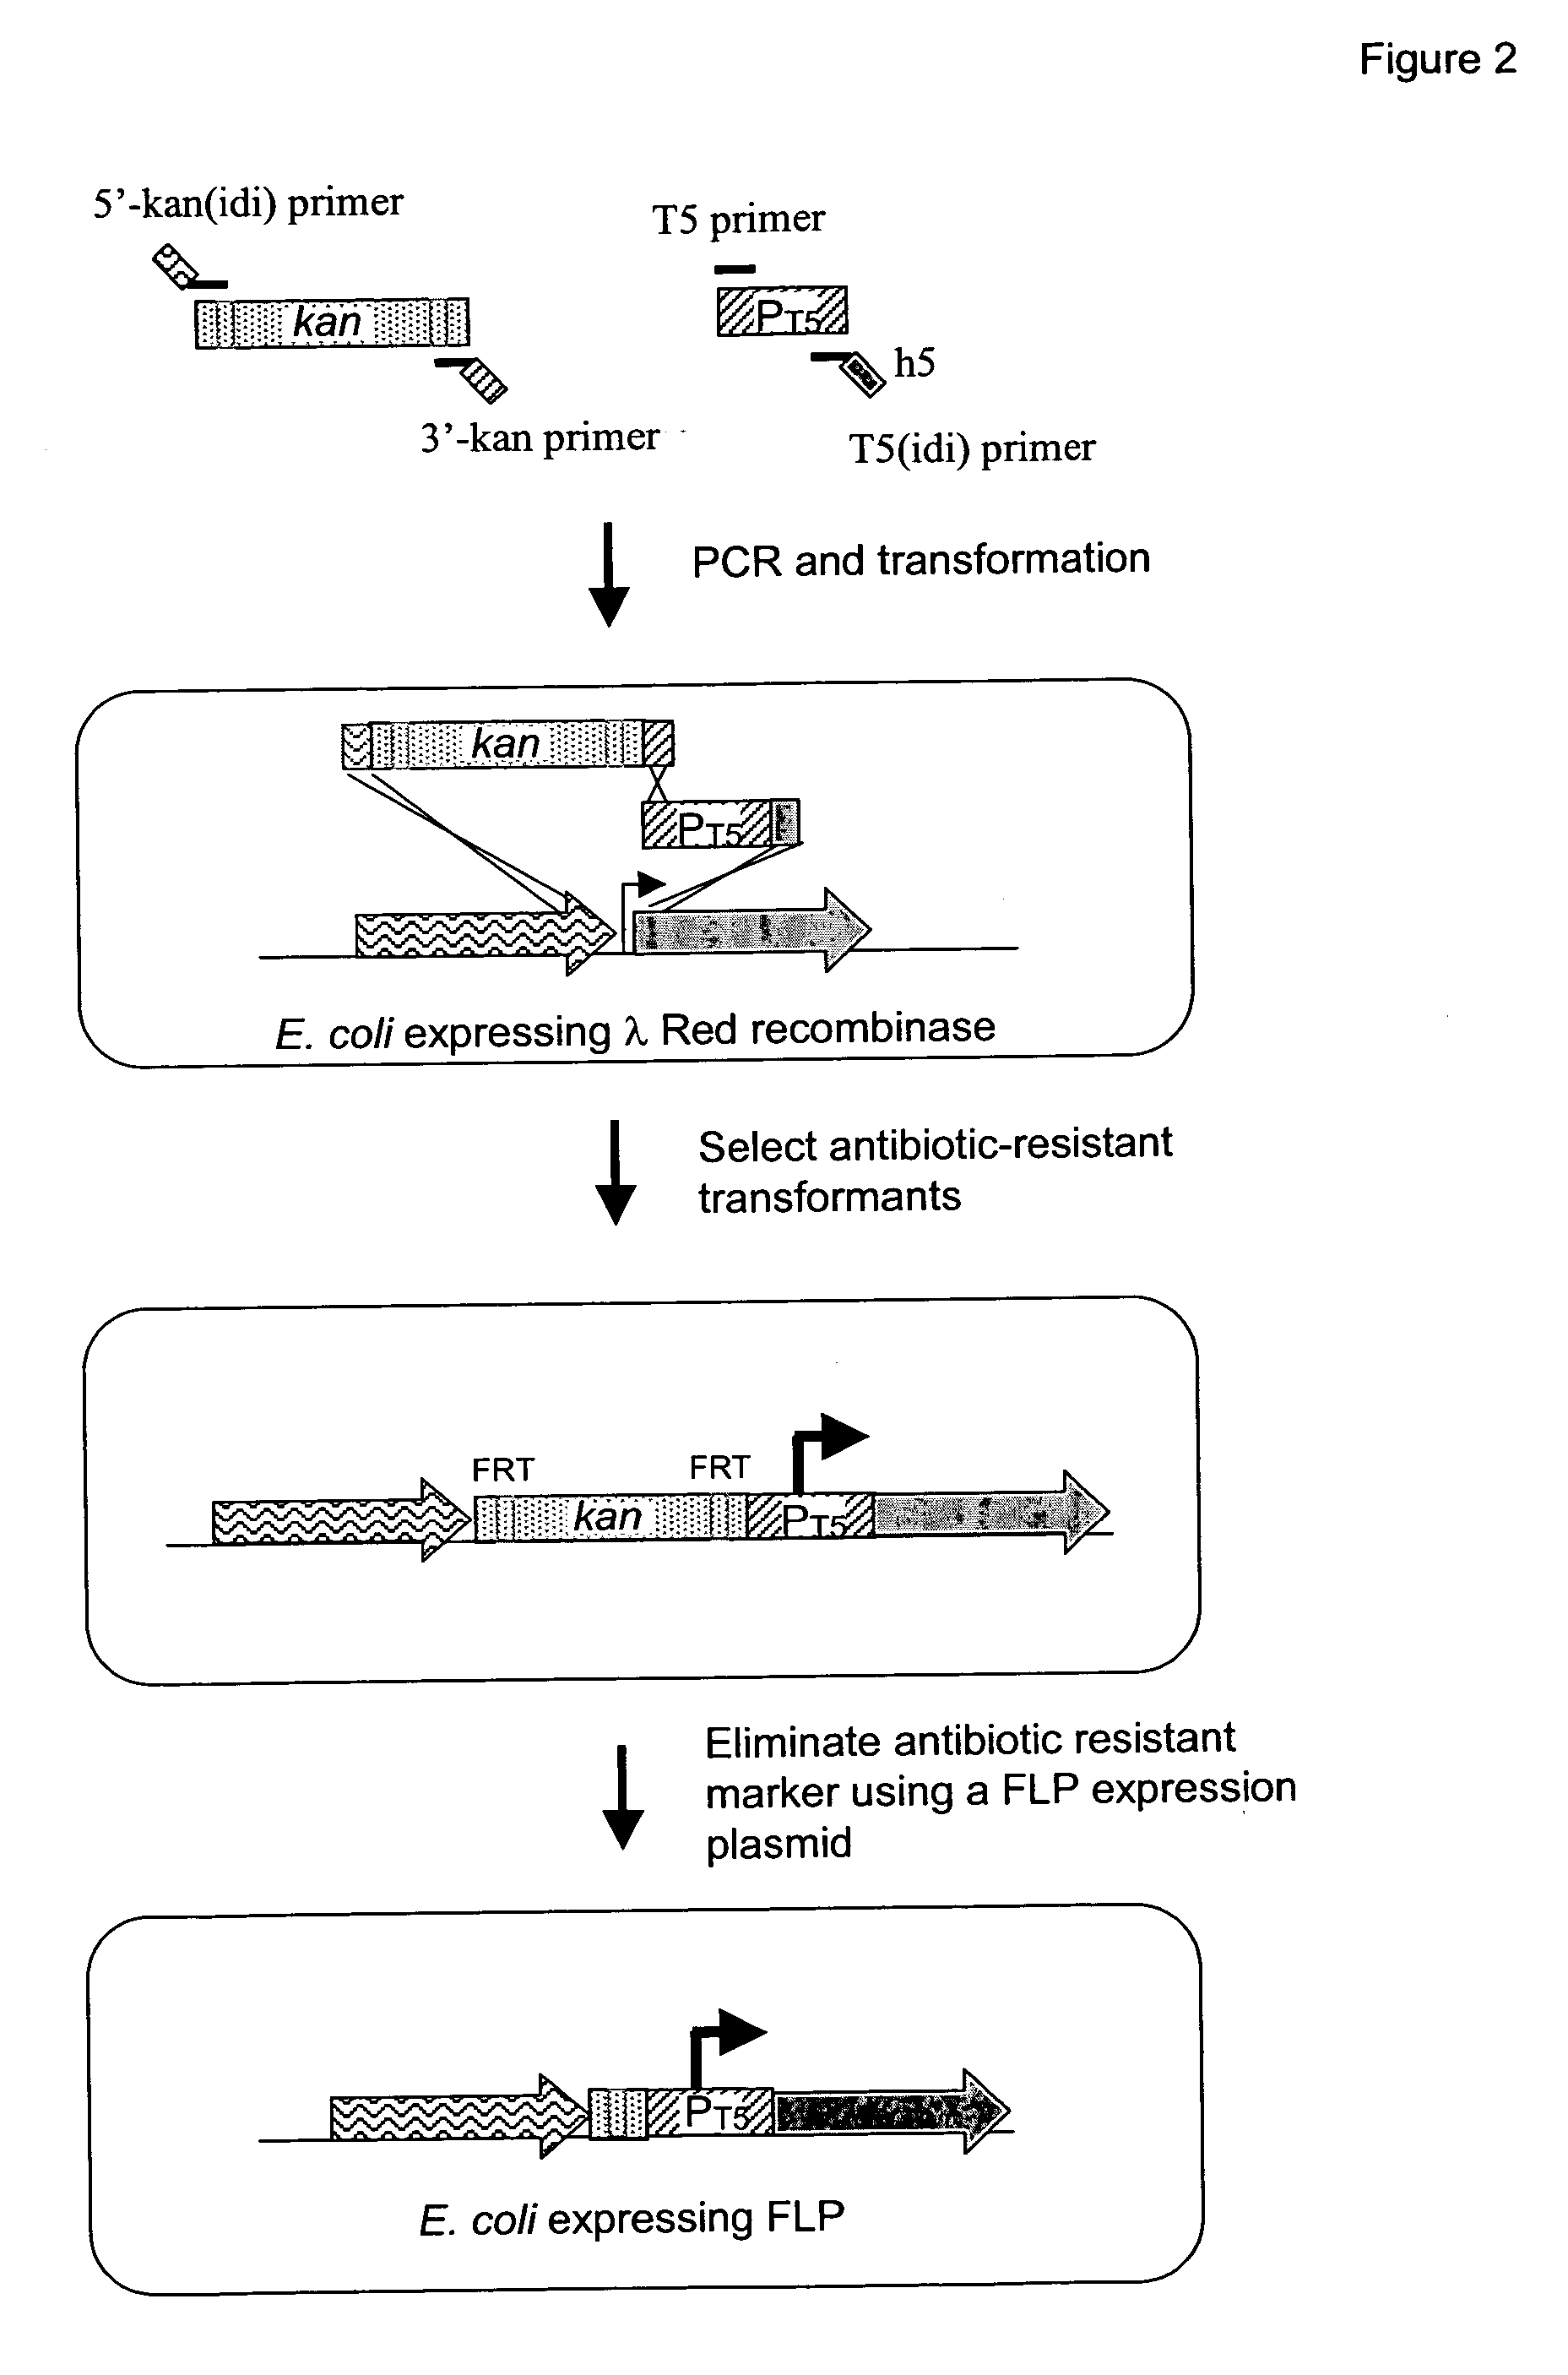 Method to increase hydrophobic compound titer in a recombinant microorganism